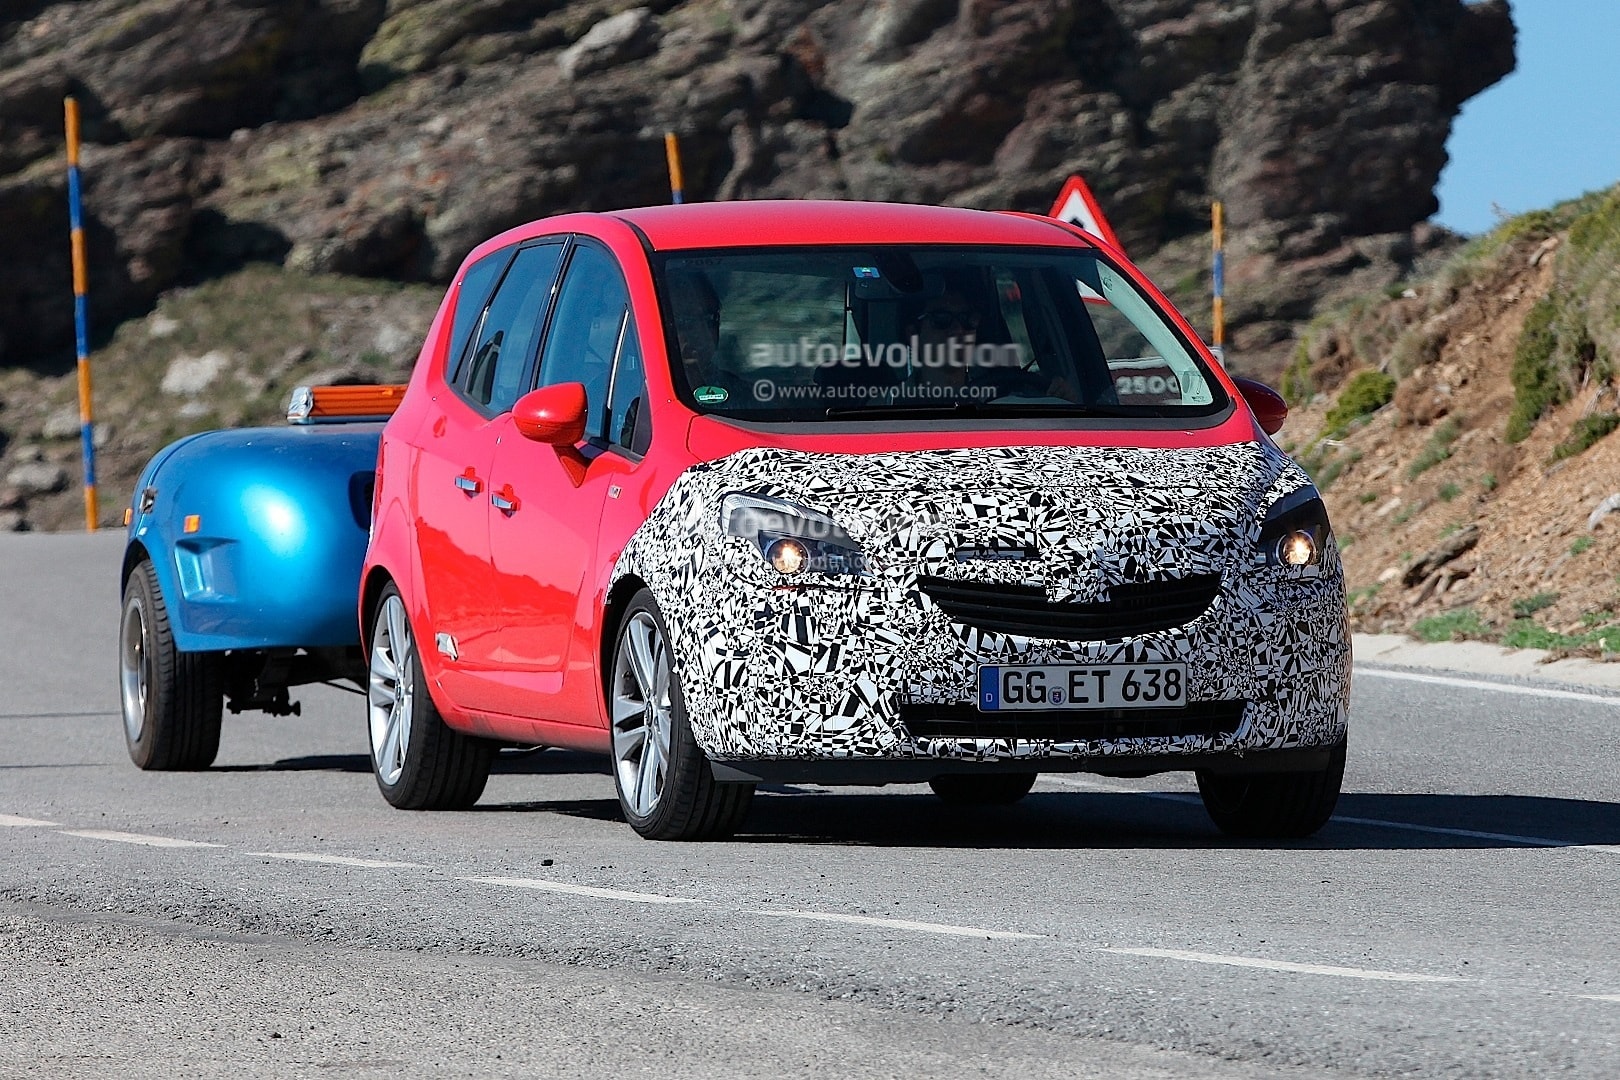 Overview of the compact van Opel Meriva B – Articles and news about tuning